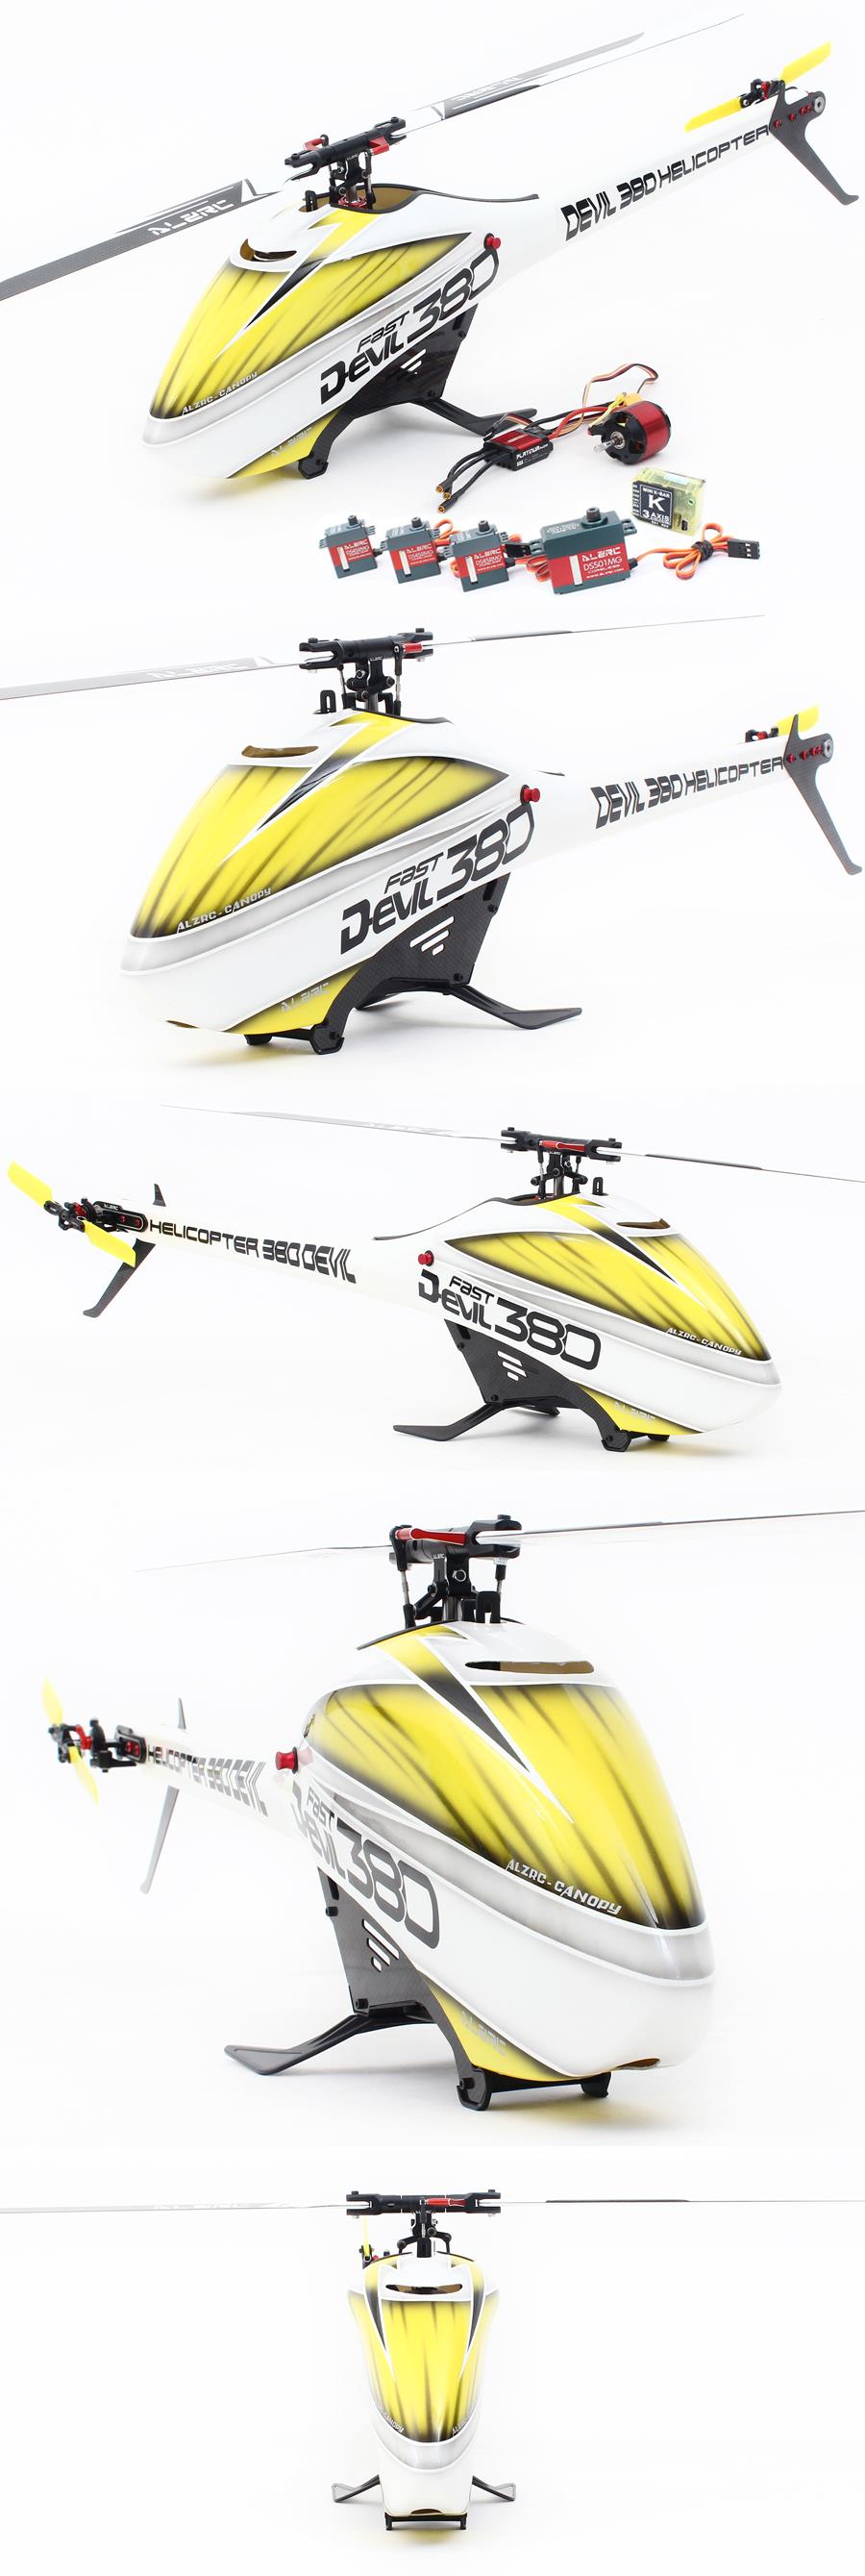 ALZRC Devil 380 FAST RC Helicopter Super Combo - Photo: 7